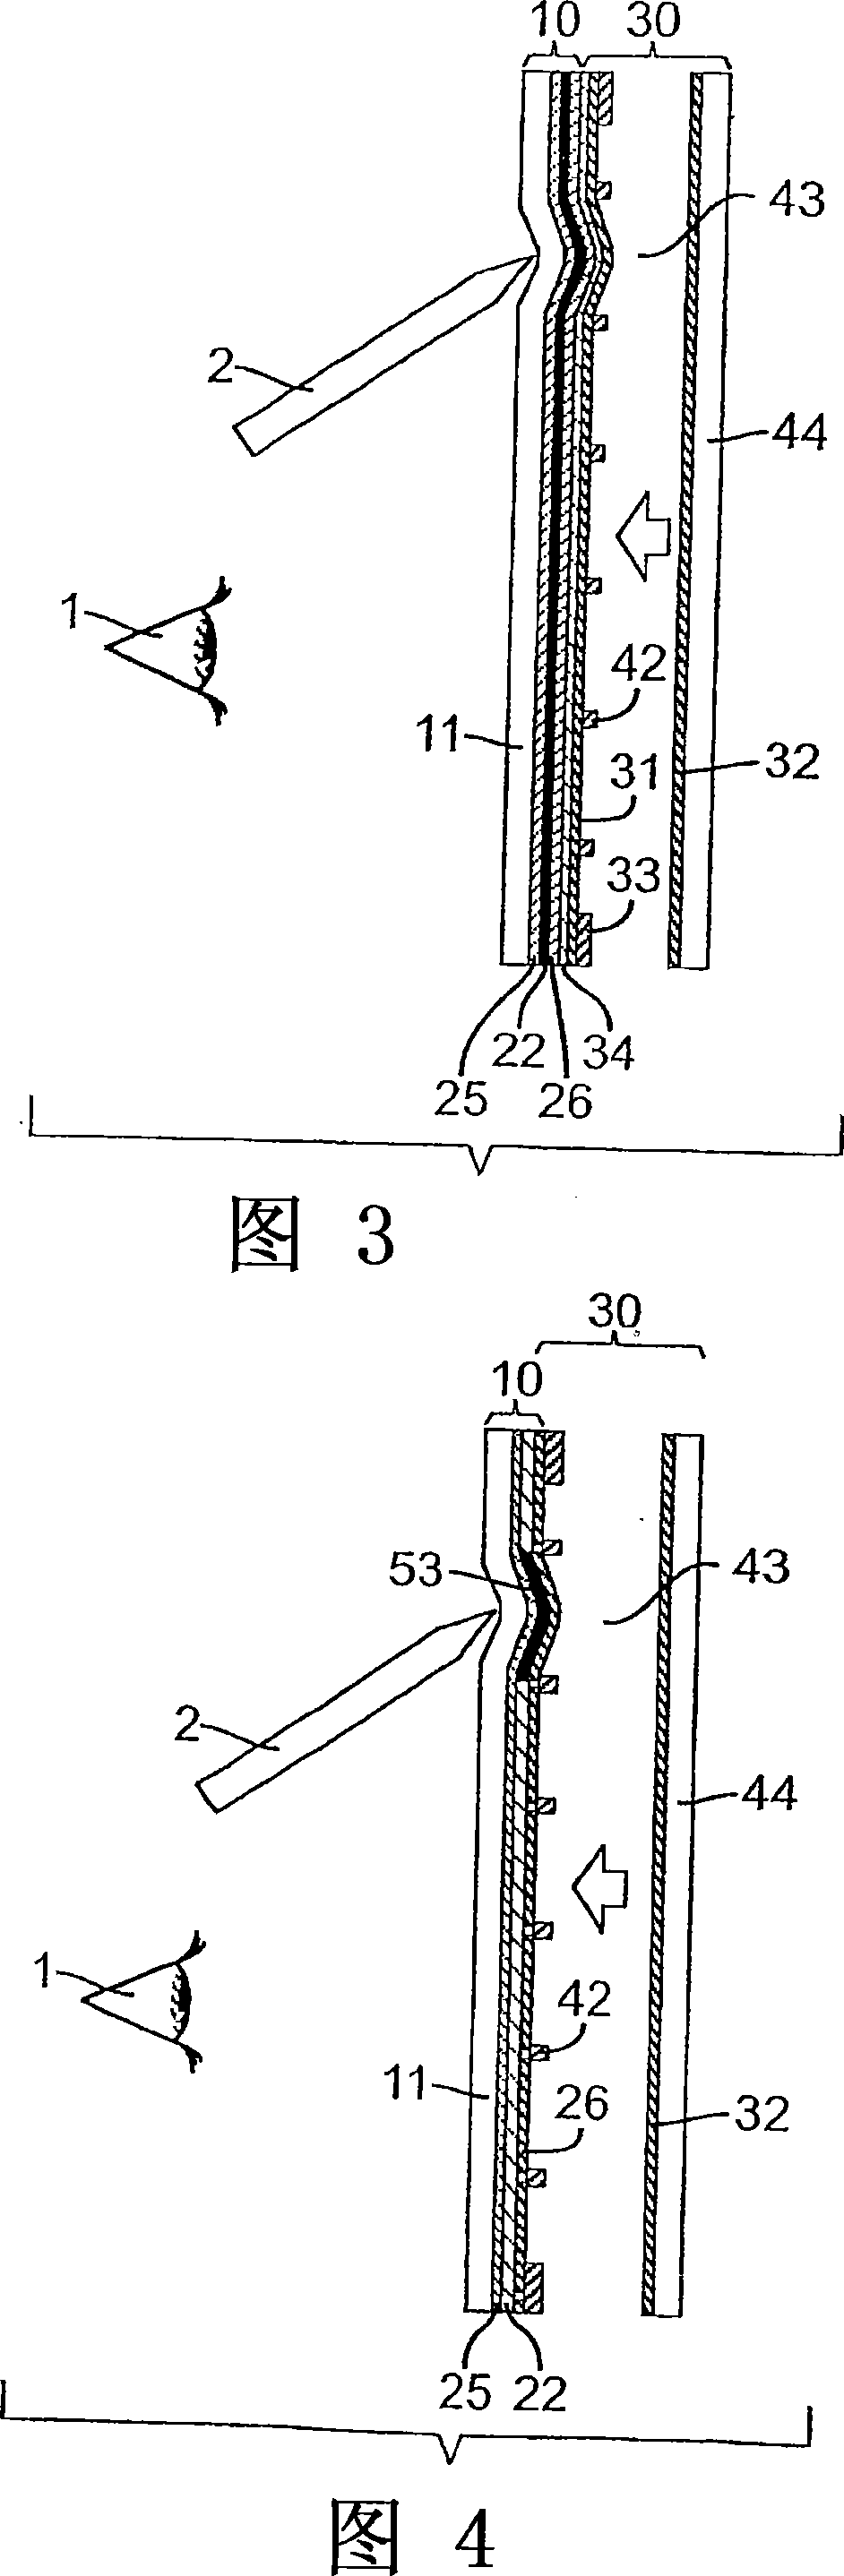 Method for making a display with integrated touchscreen